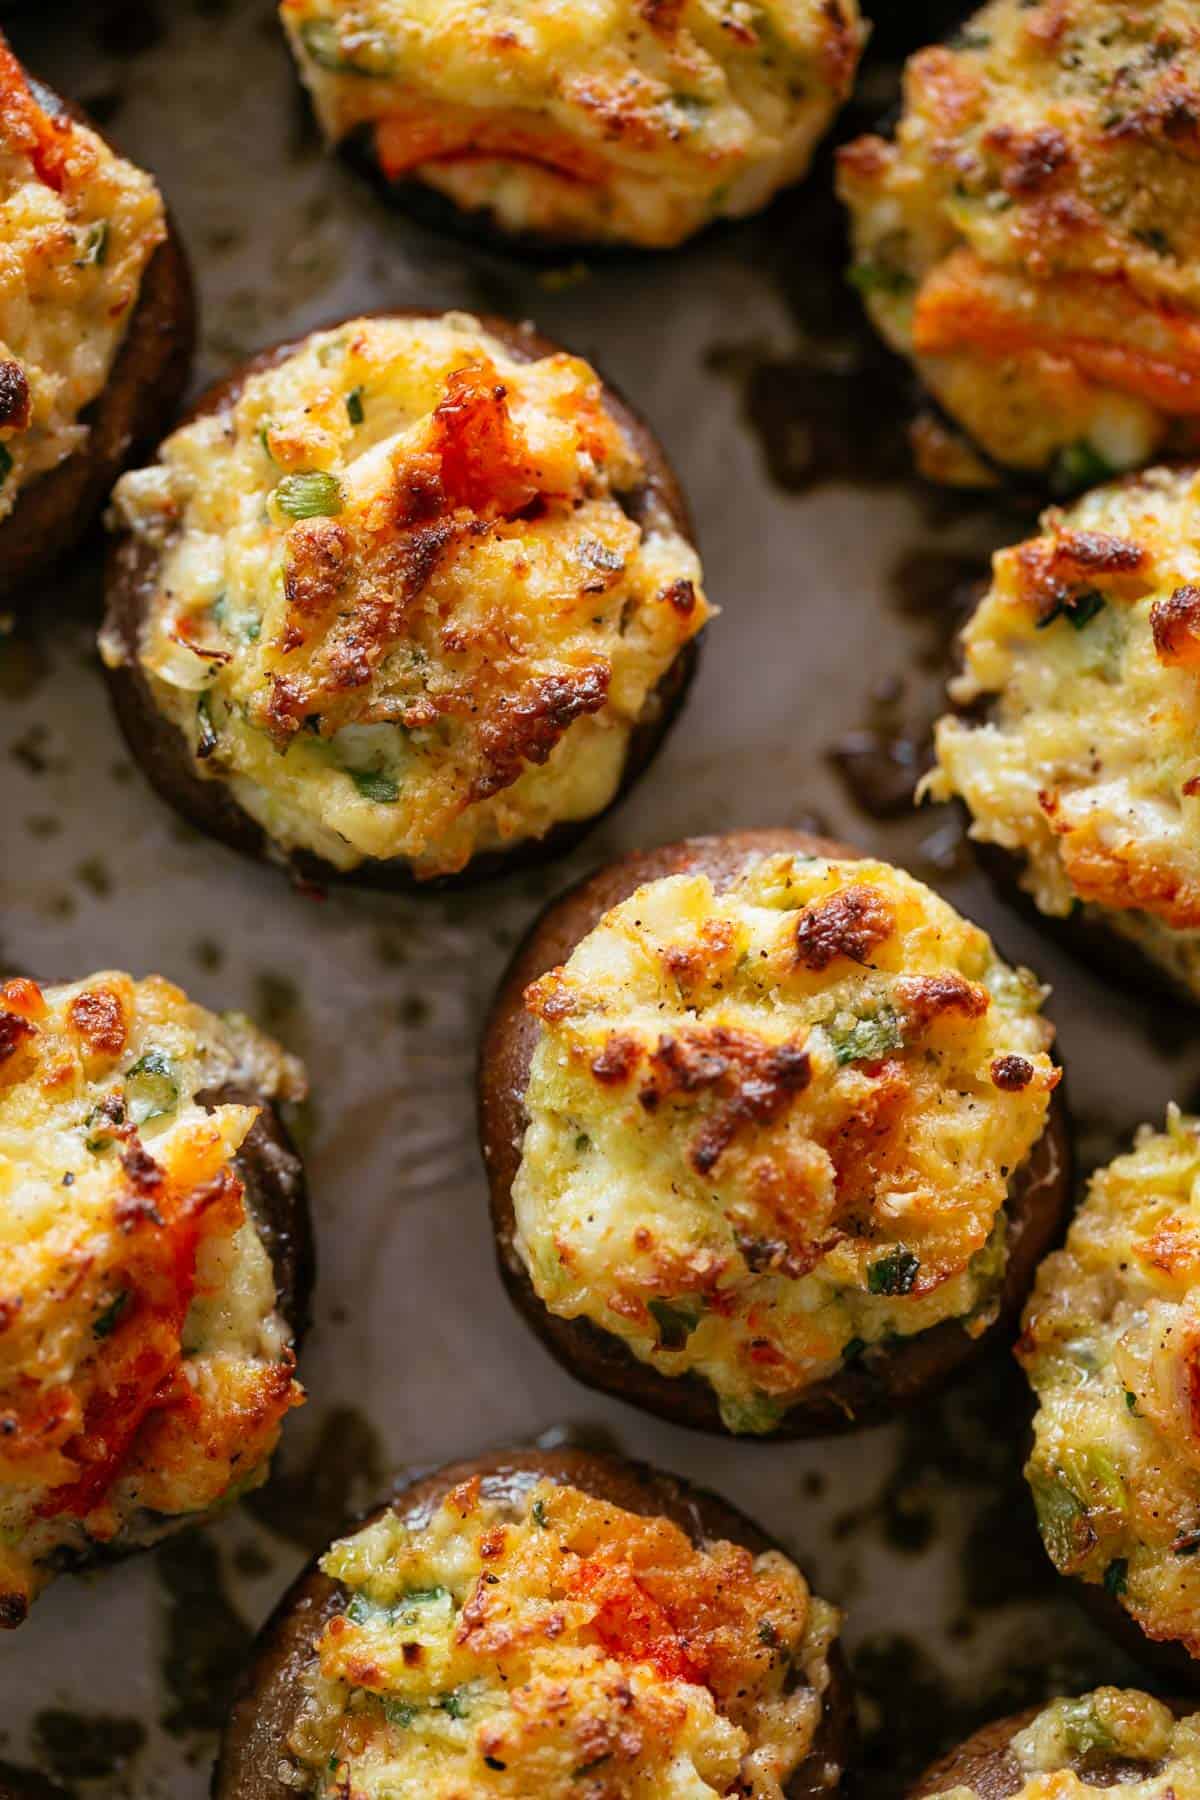 Stuffed mushrooms with a gourmet taste, you can't go wrong with this recipe. A cream cheese and mayo combination makes these some of the best Crab Stuffed Mushrooms to hit your table. They are a hit! #stuffedmushrooms #appetizers #newyears